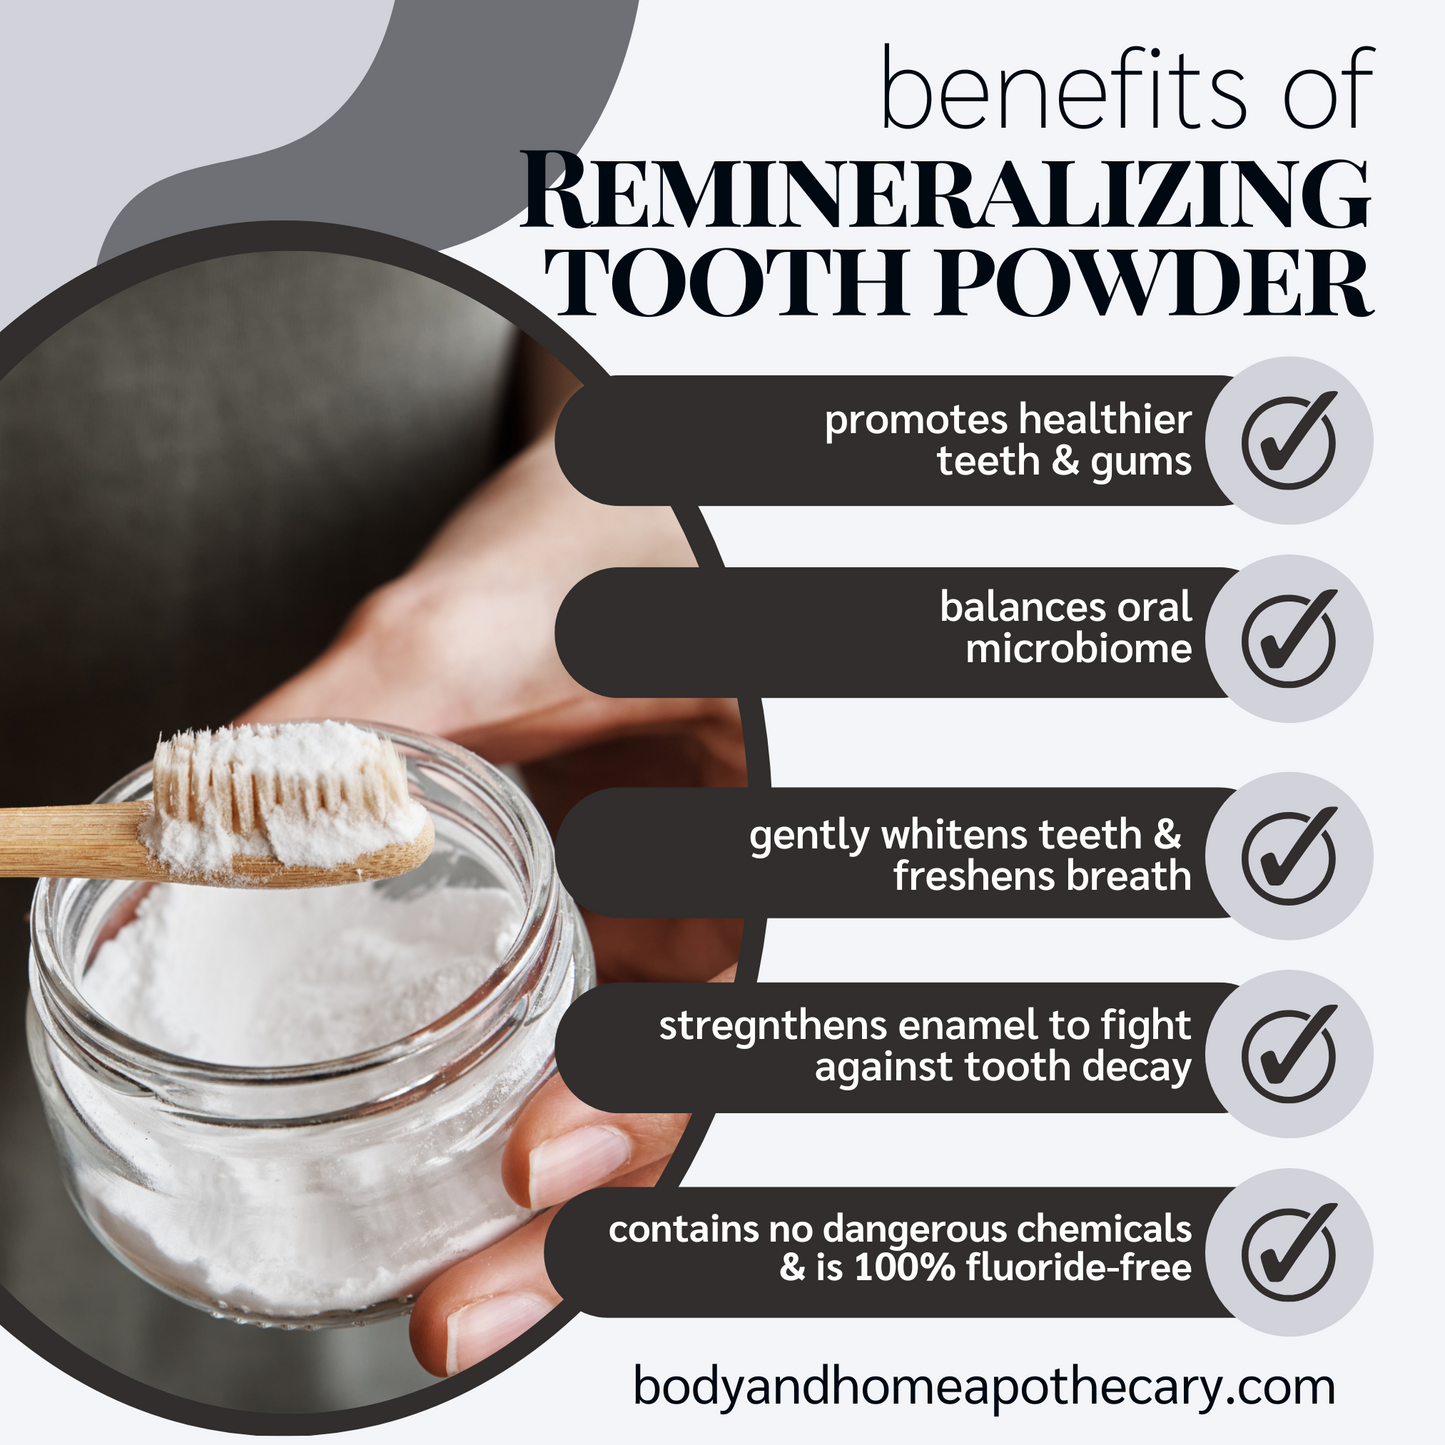 Mineralizing Tooth Powder